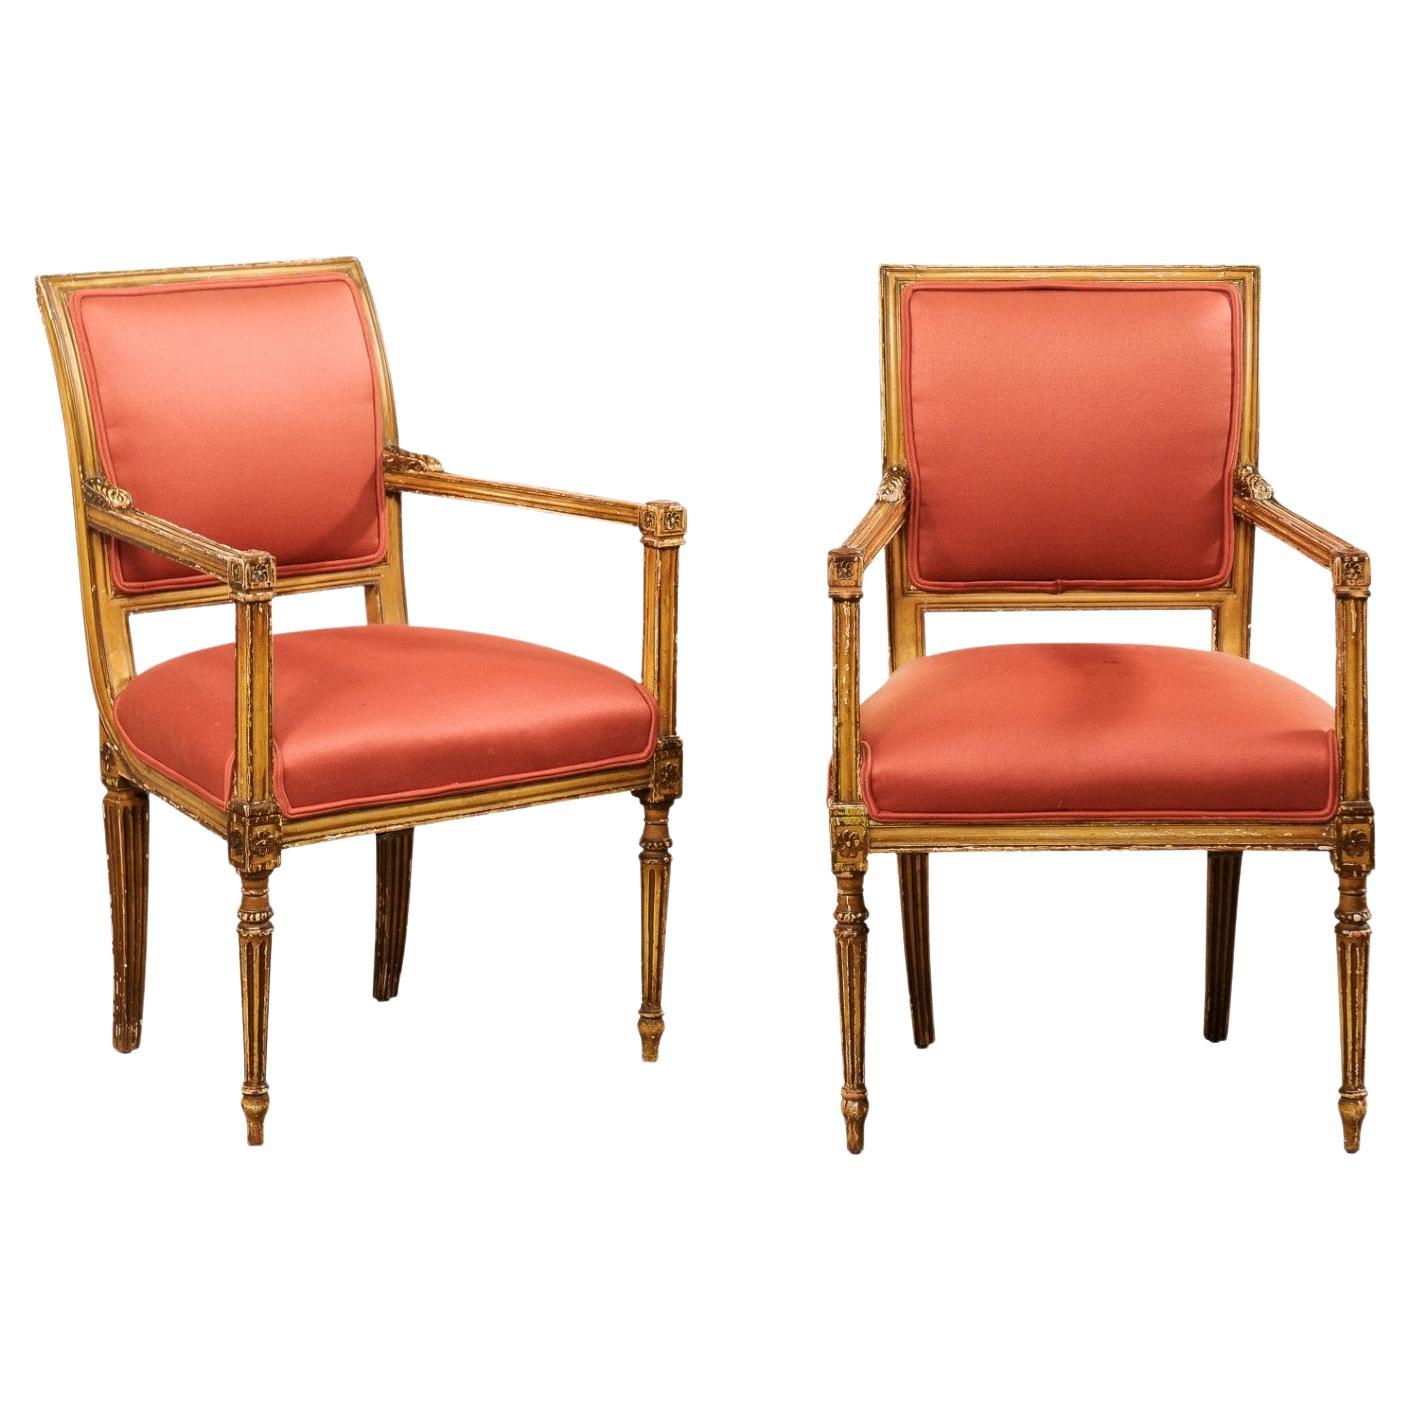 Antique Pair of Neoclassic Style Armchairs, Italy